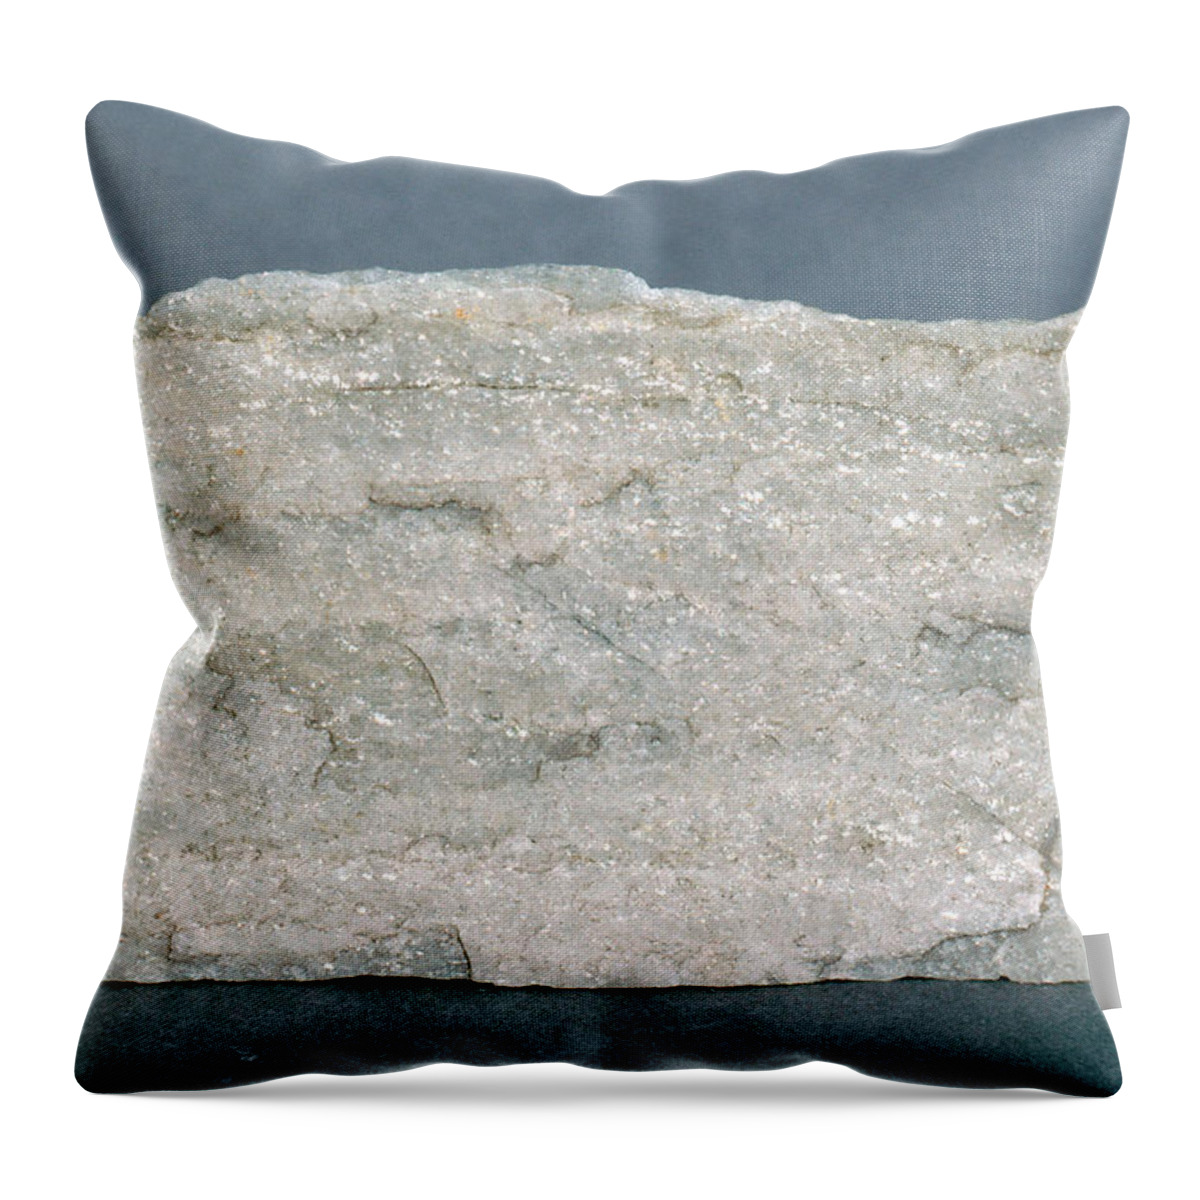 Foliated Throw Pillow featuring the photograph Micaceous Quartzite #2 by A.b. Joyce